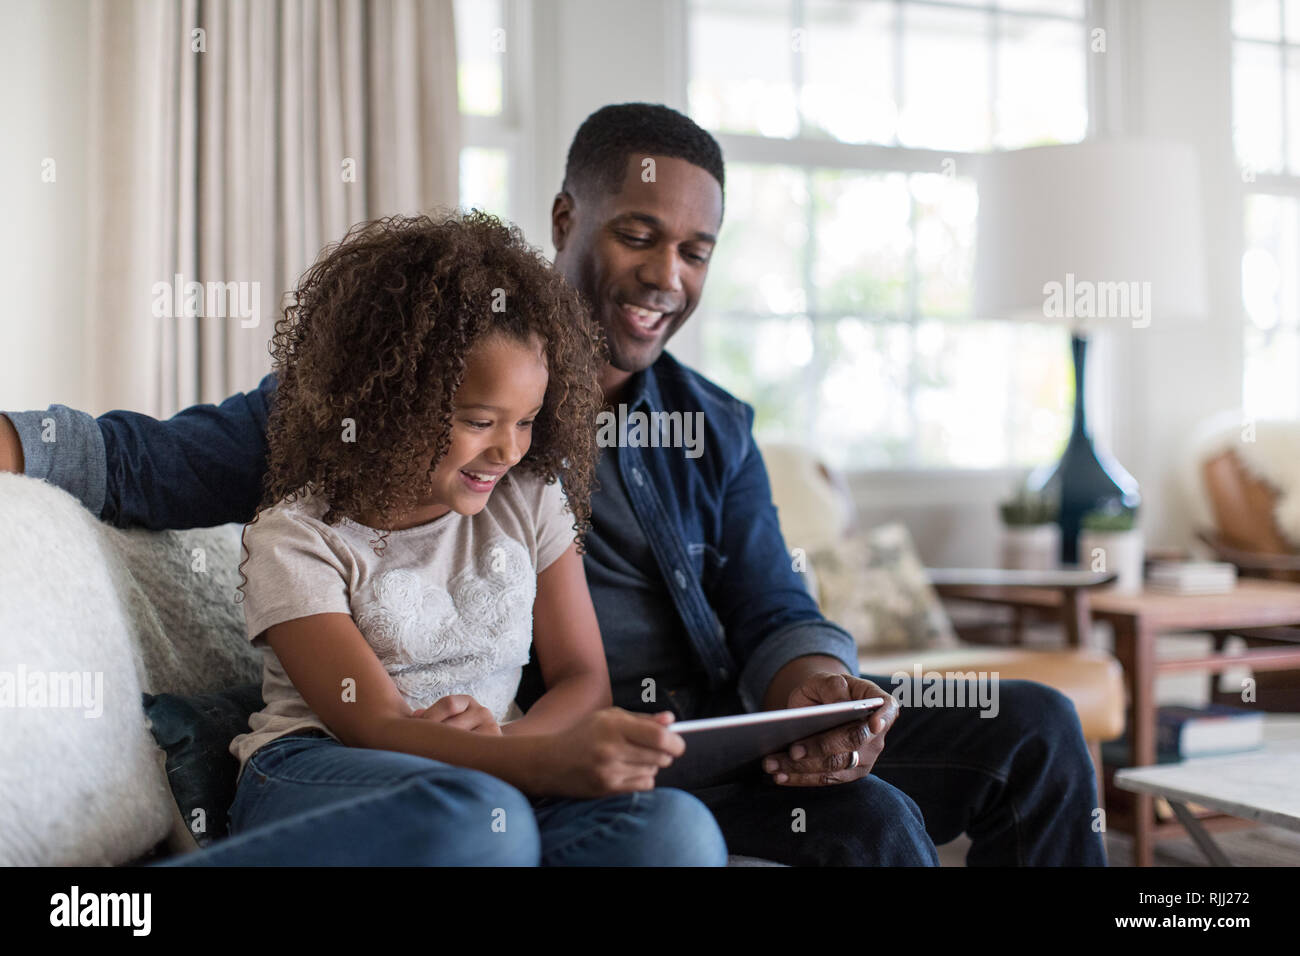 African American father and daughter using digital tablet together Stock Photo